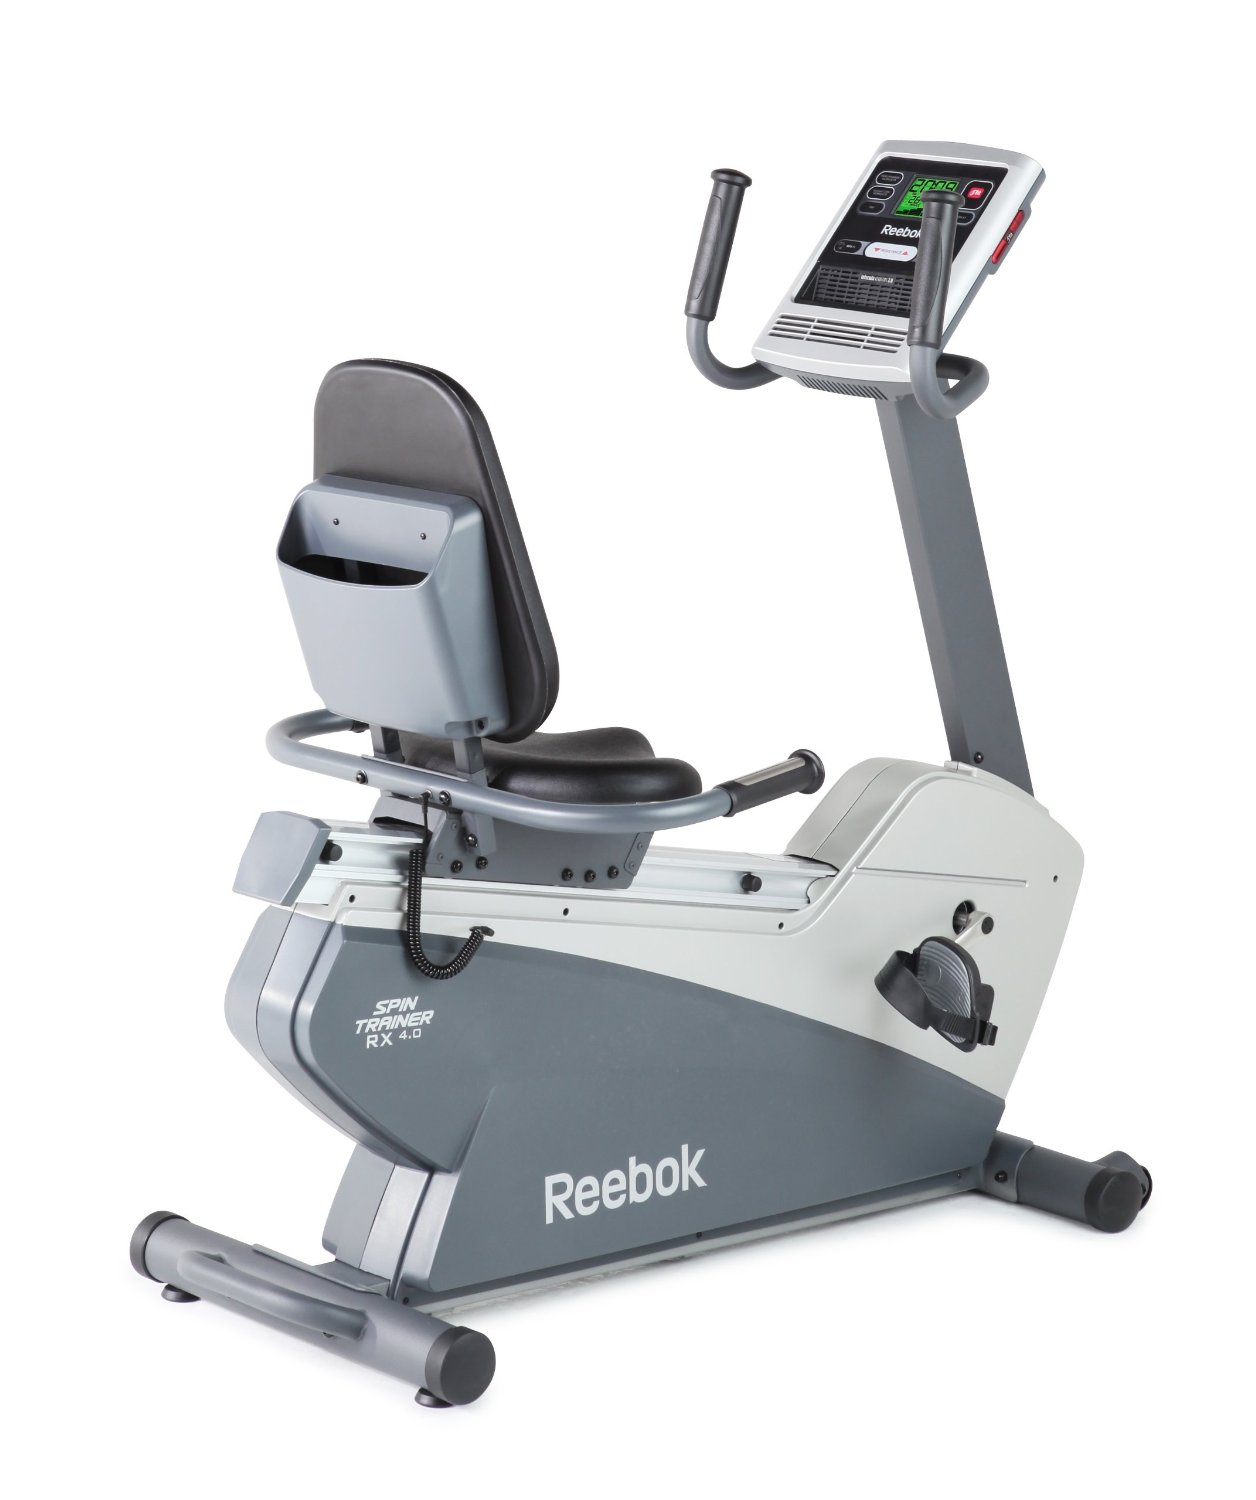 Reebok Trainer RX 4.0 Exercise Bike Review